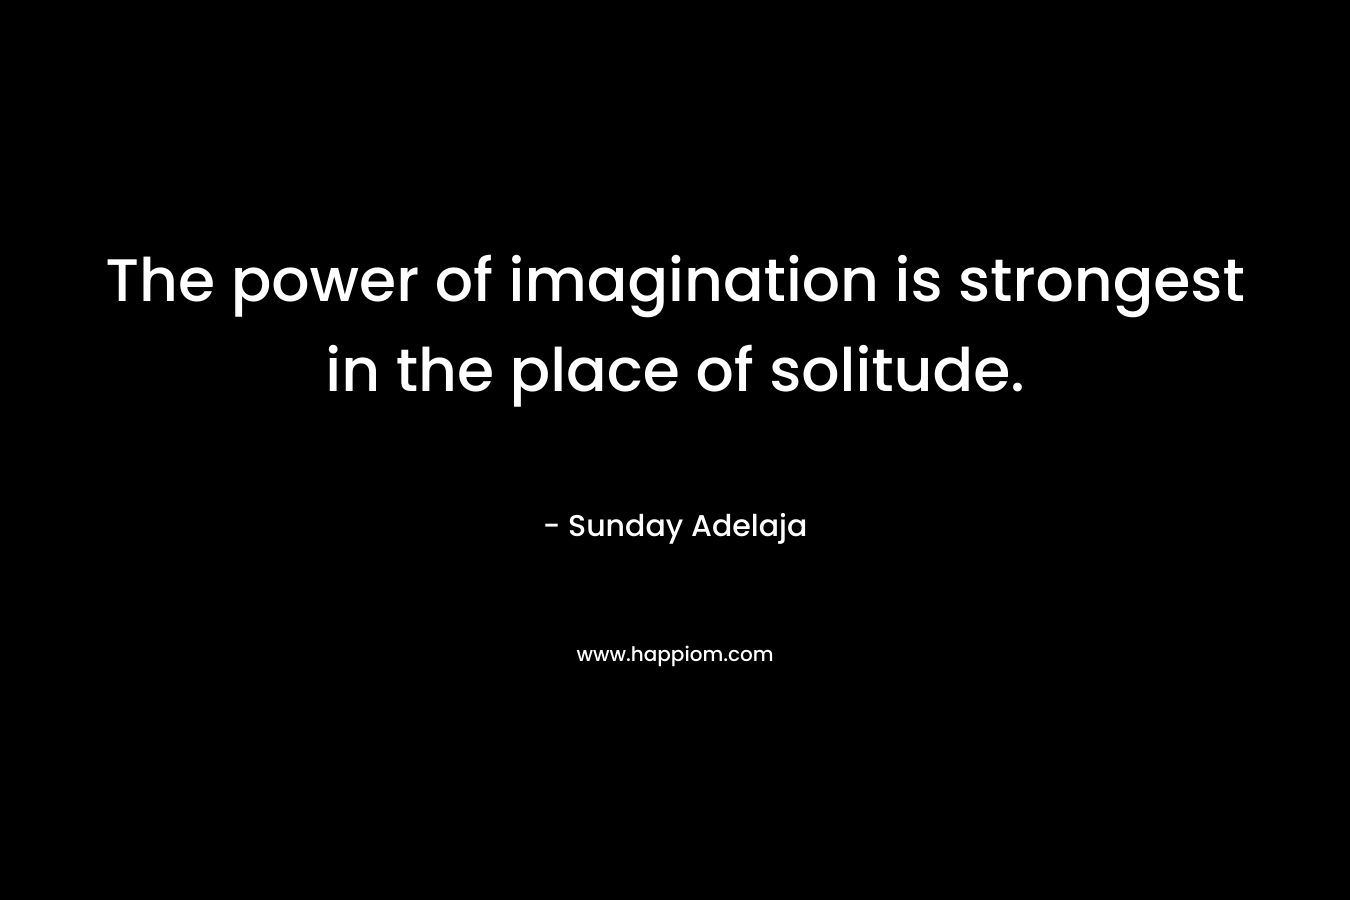 The power of imagination is strongest in the place of solitude.